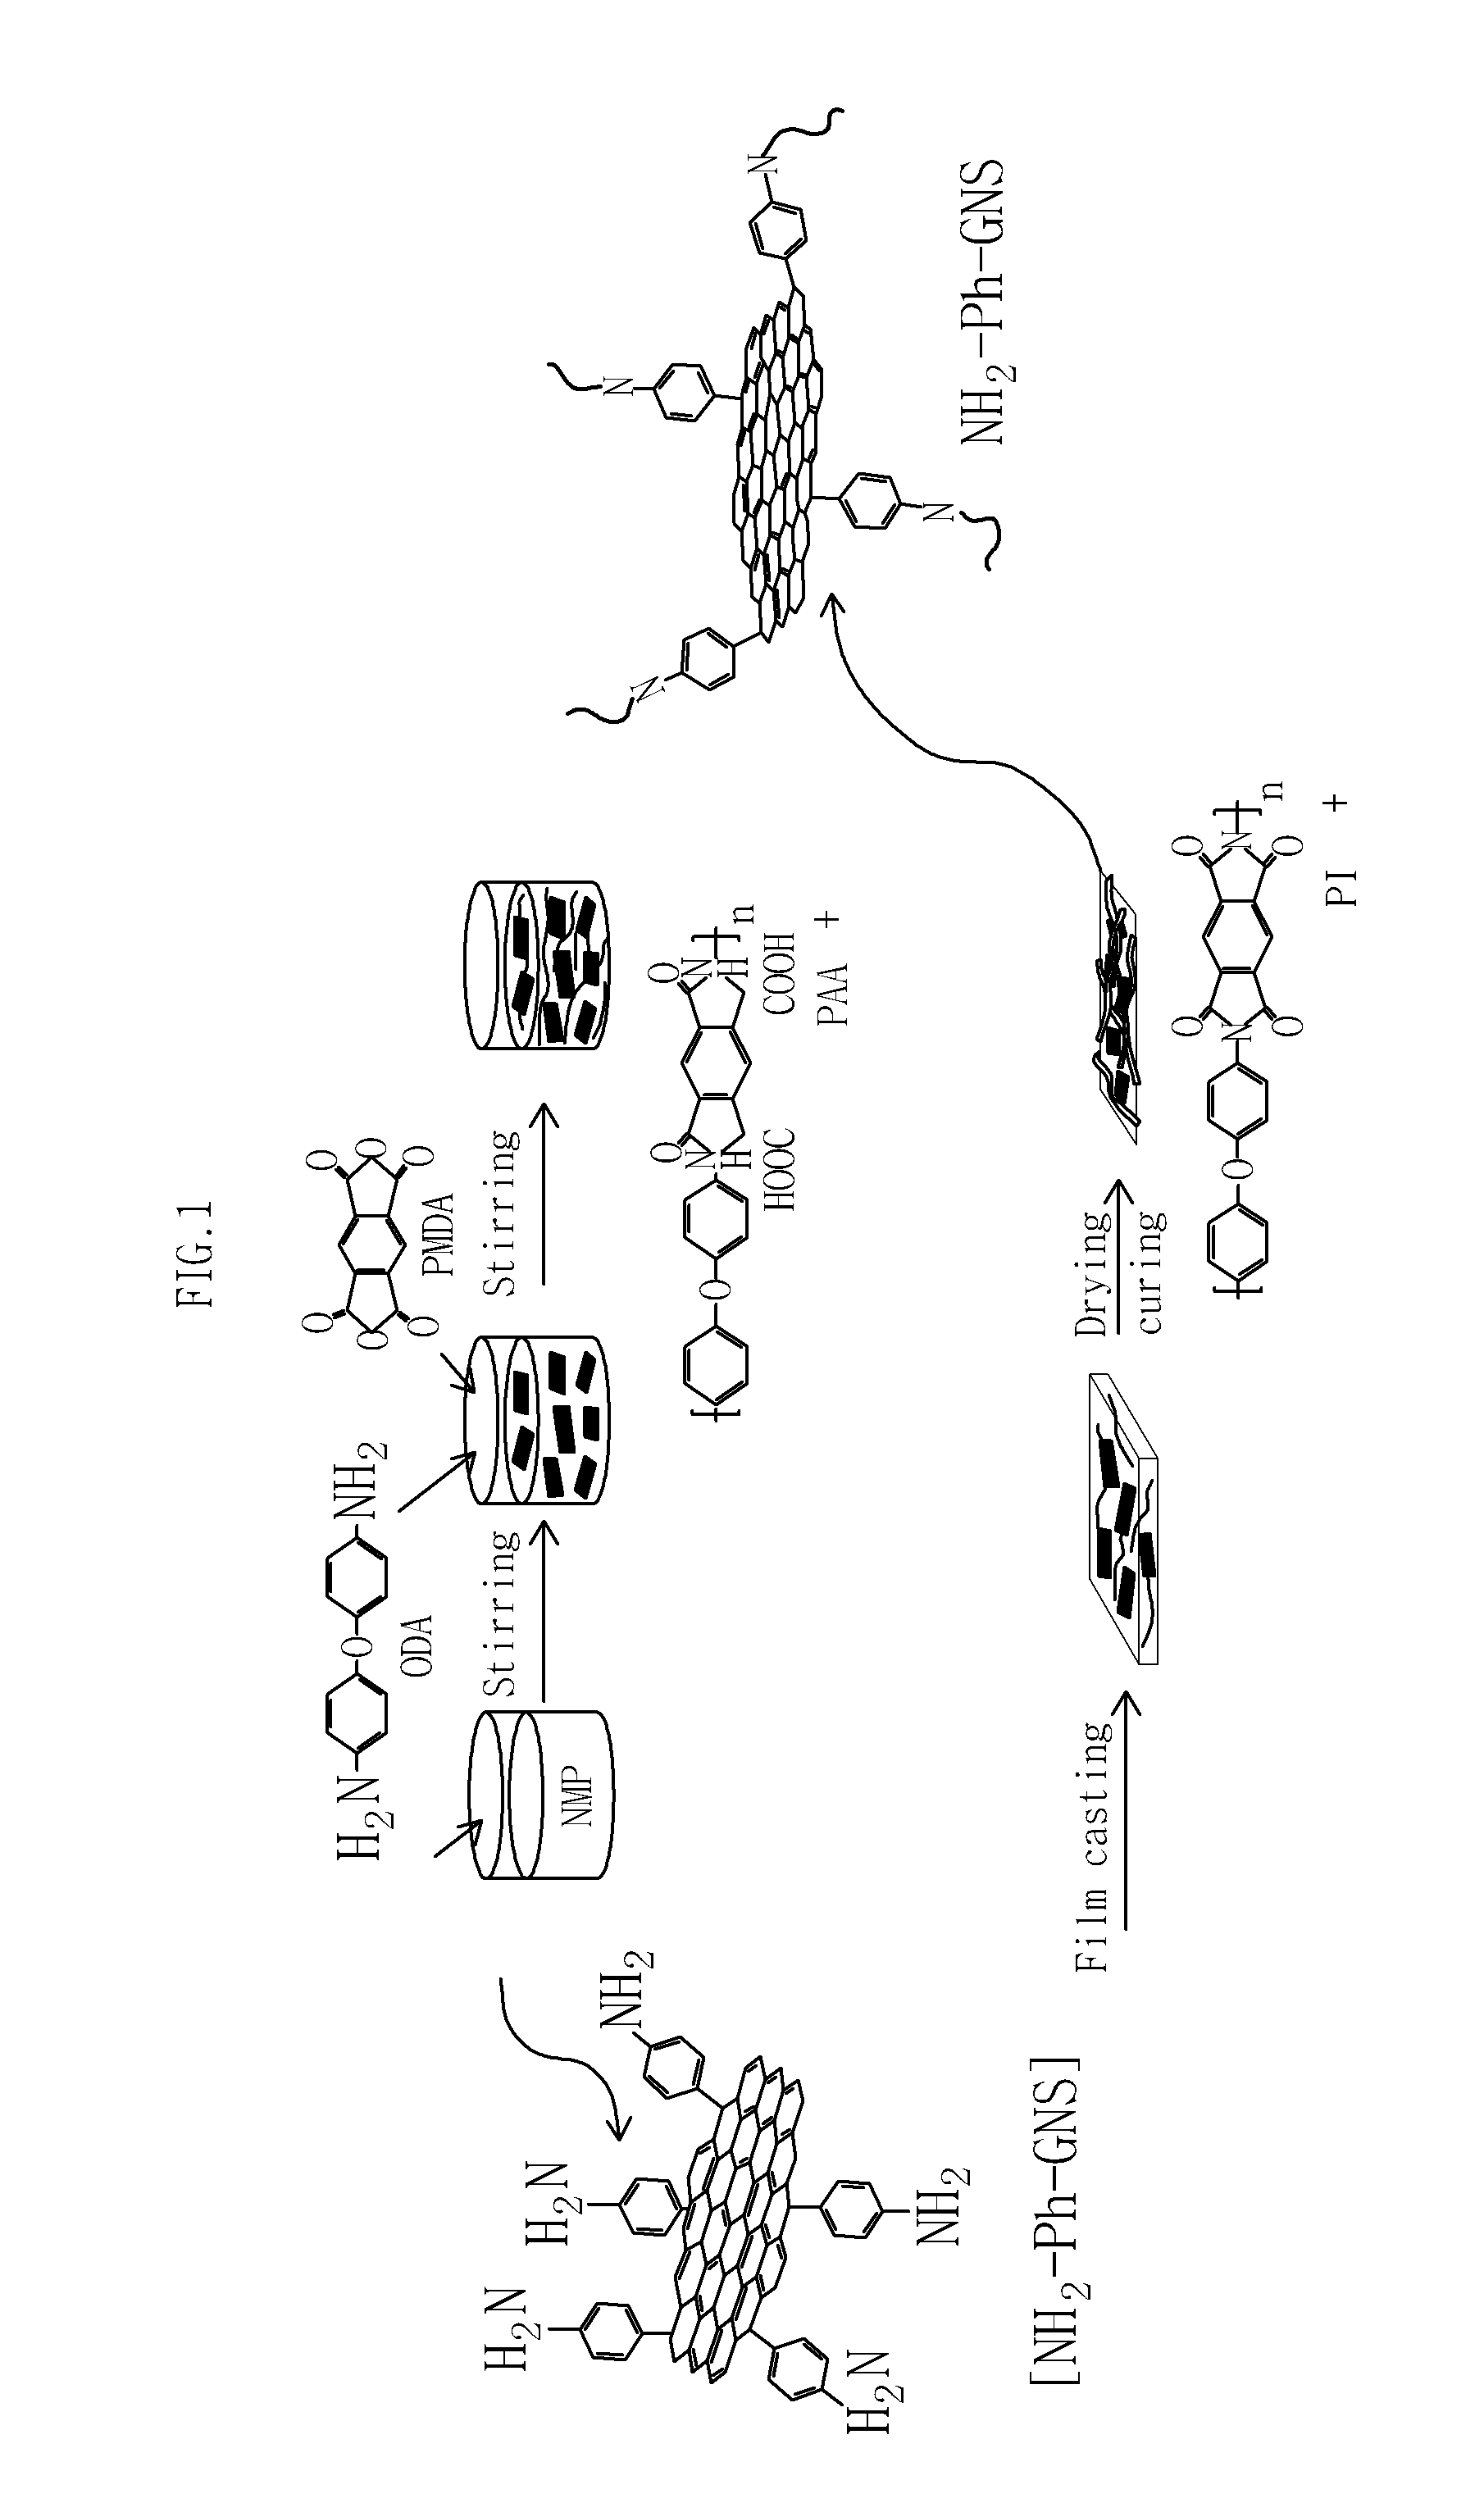 Polyimide-graphene composite material and method for preparing same